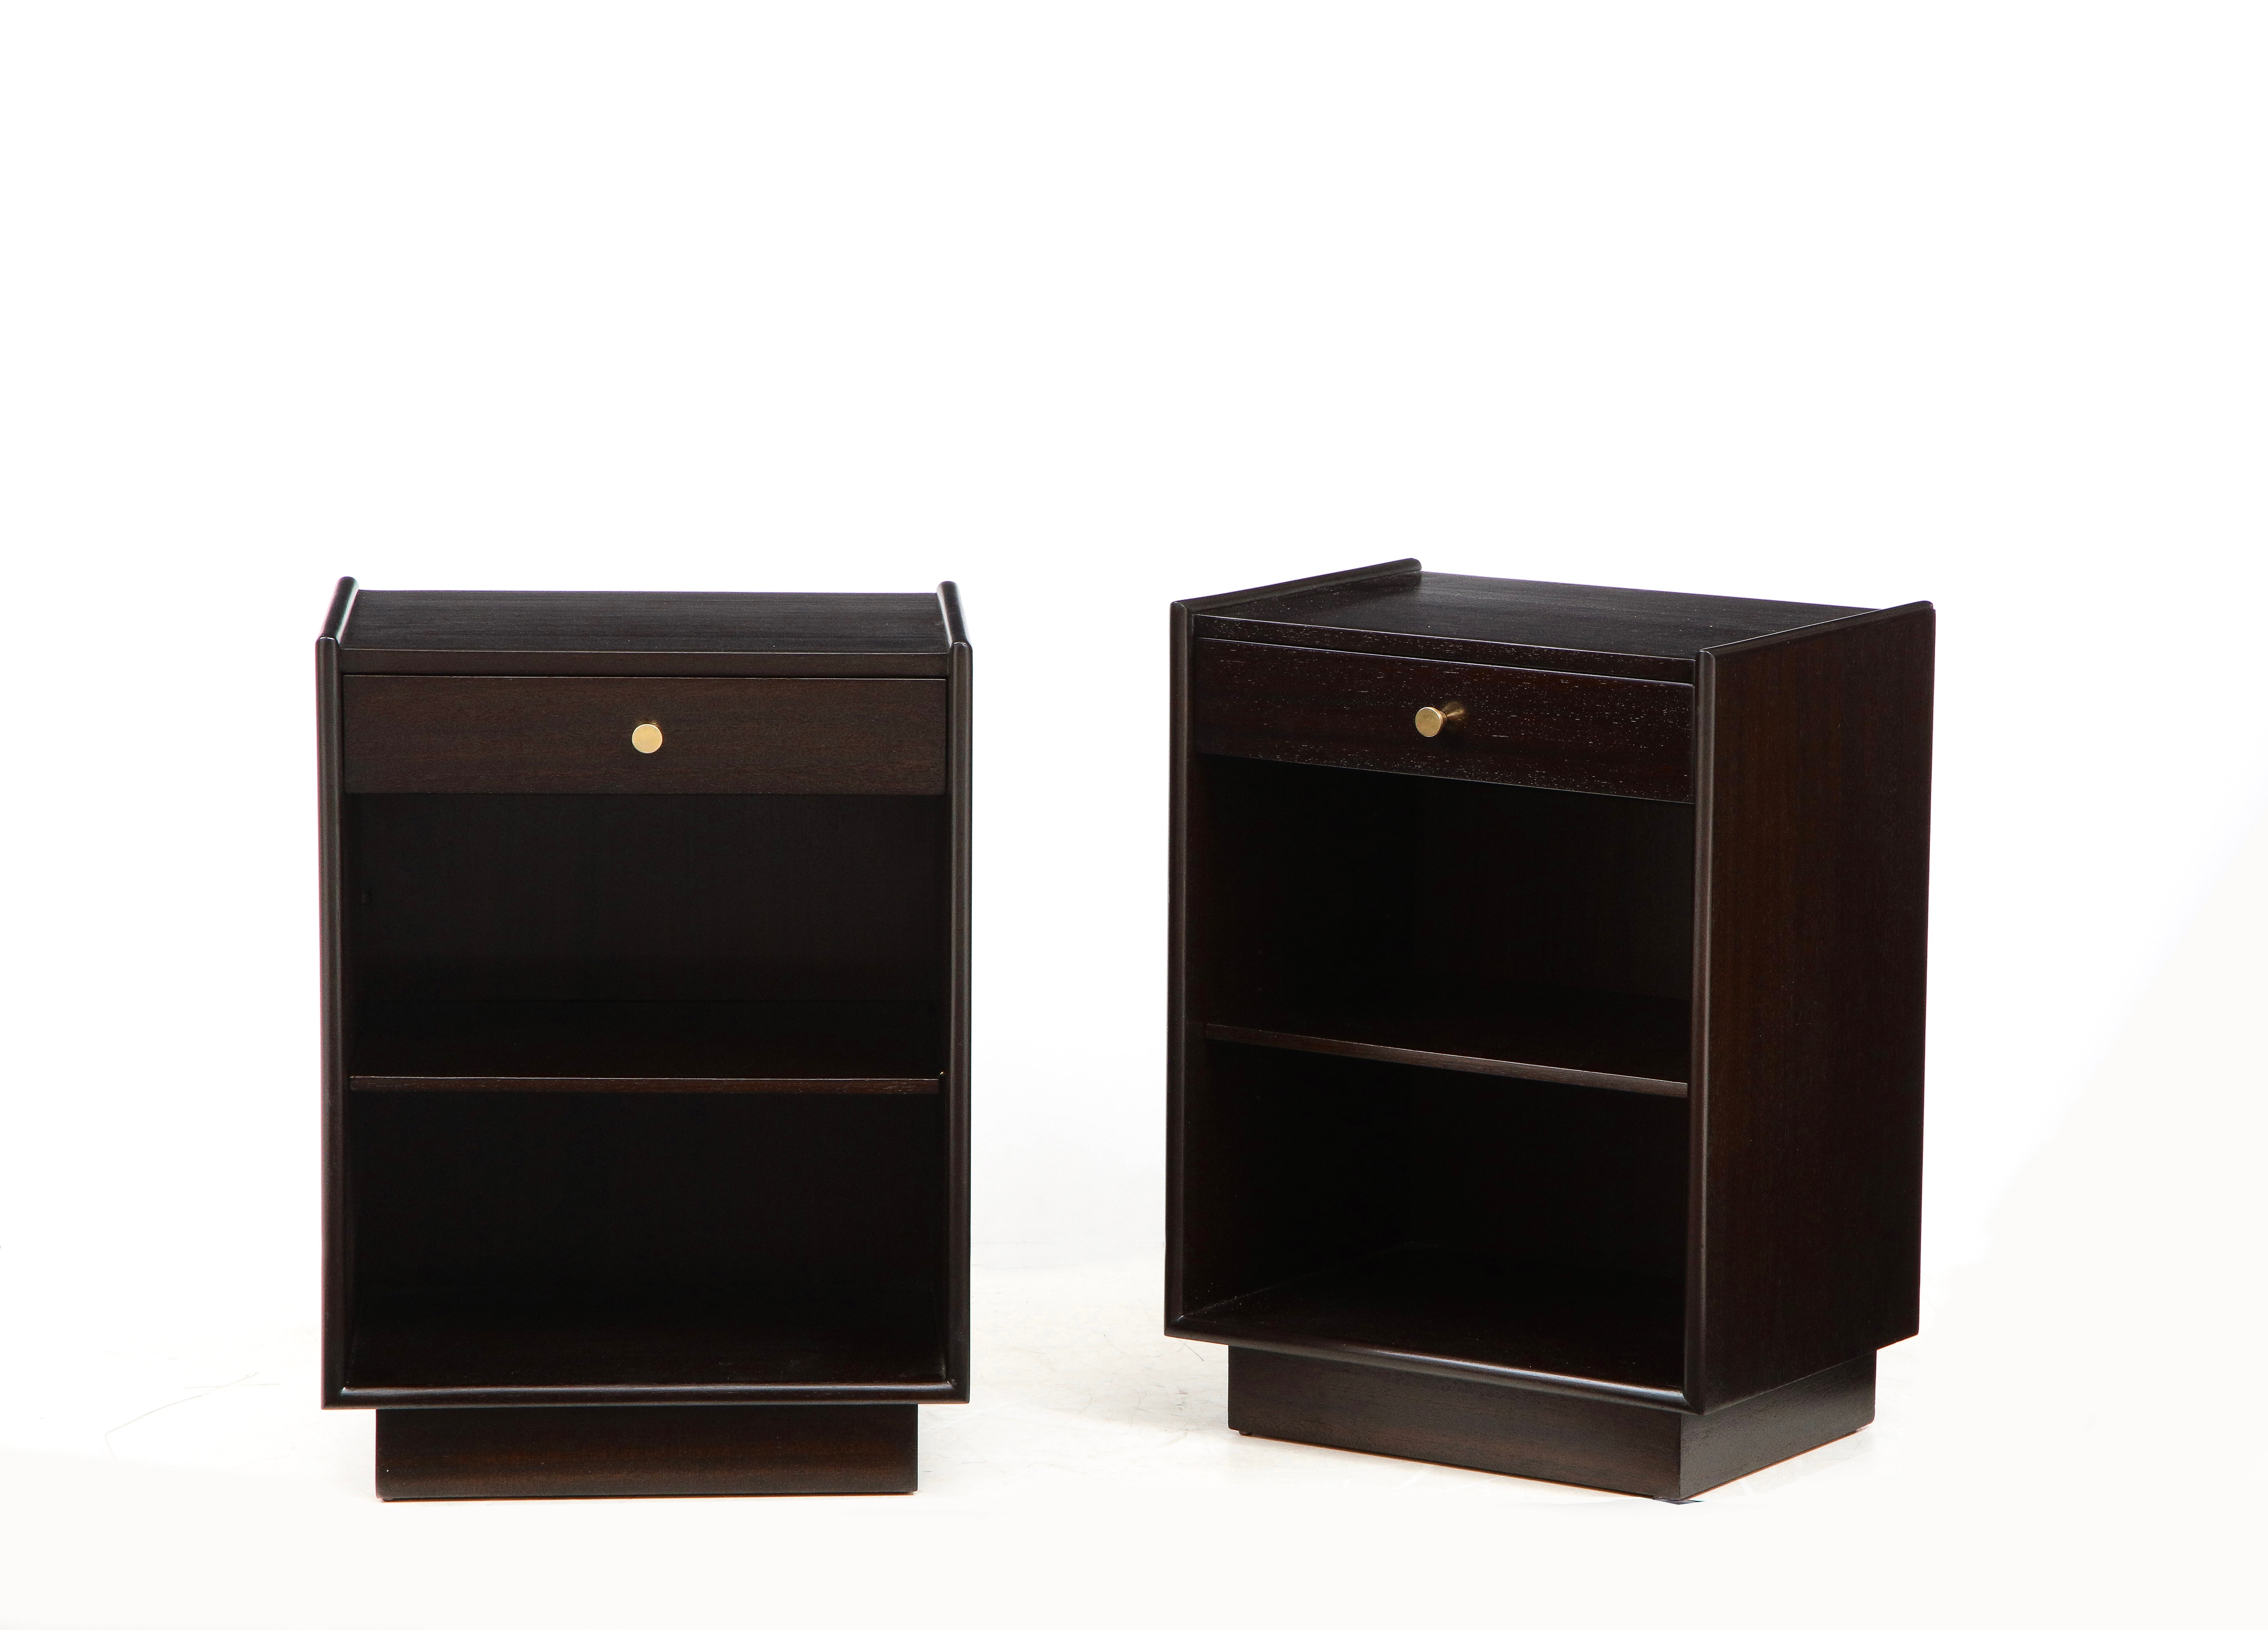 Pair of side cabinets by Harvey Probber